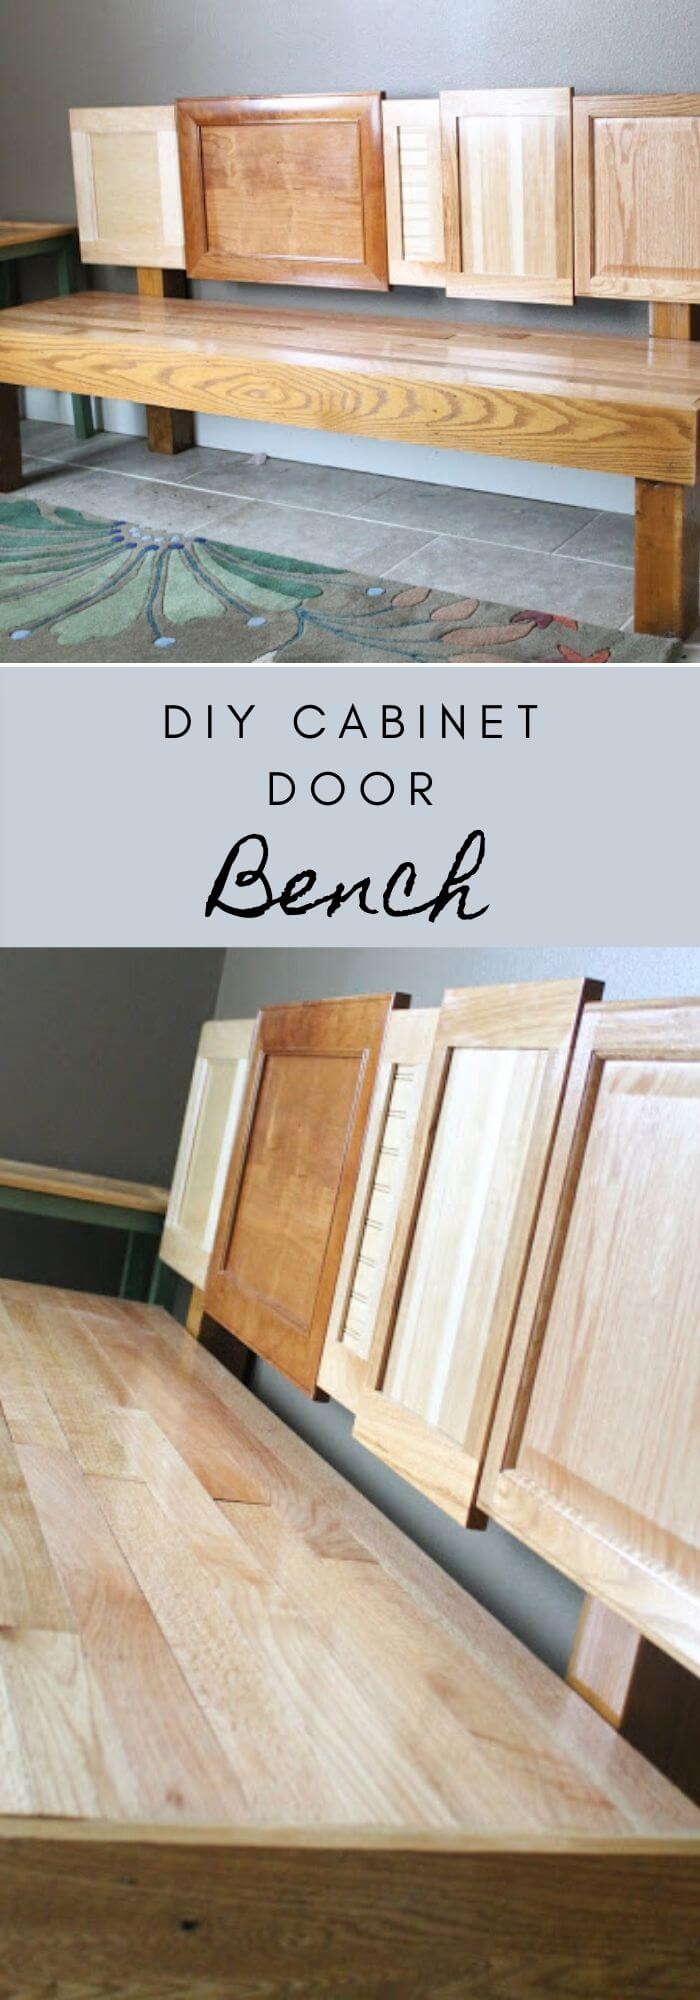 18+ Creative Repurposed Cabinet Door Ideas & Projects With ...